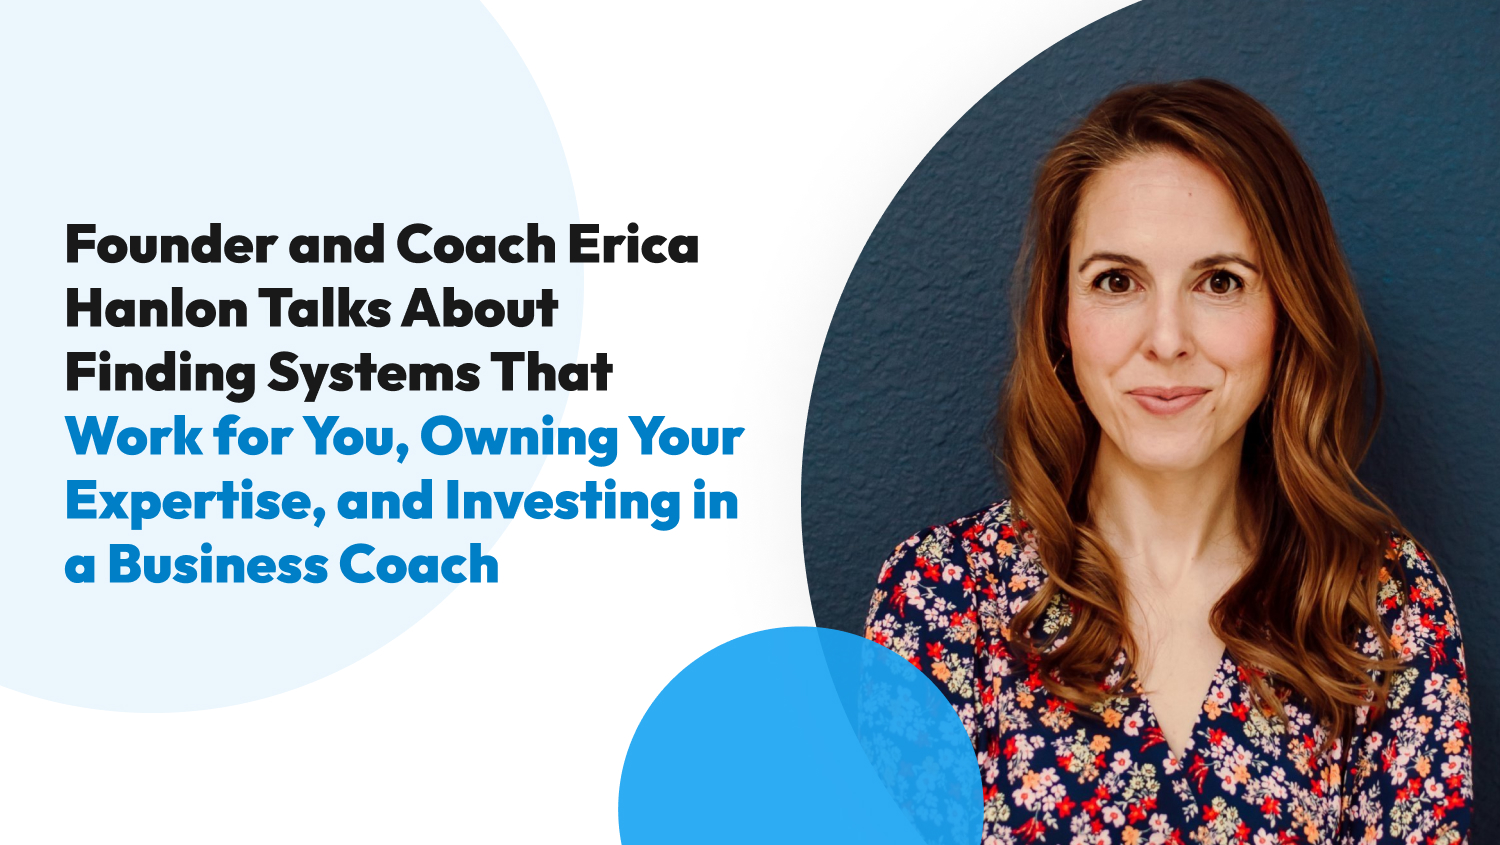 Founder and Coach Erica Hanlon Talks About Finding Systems That Work for You, Owning Your Expertise, and Investing in a Business Coach